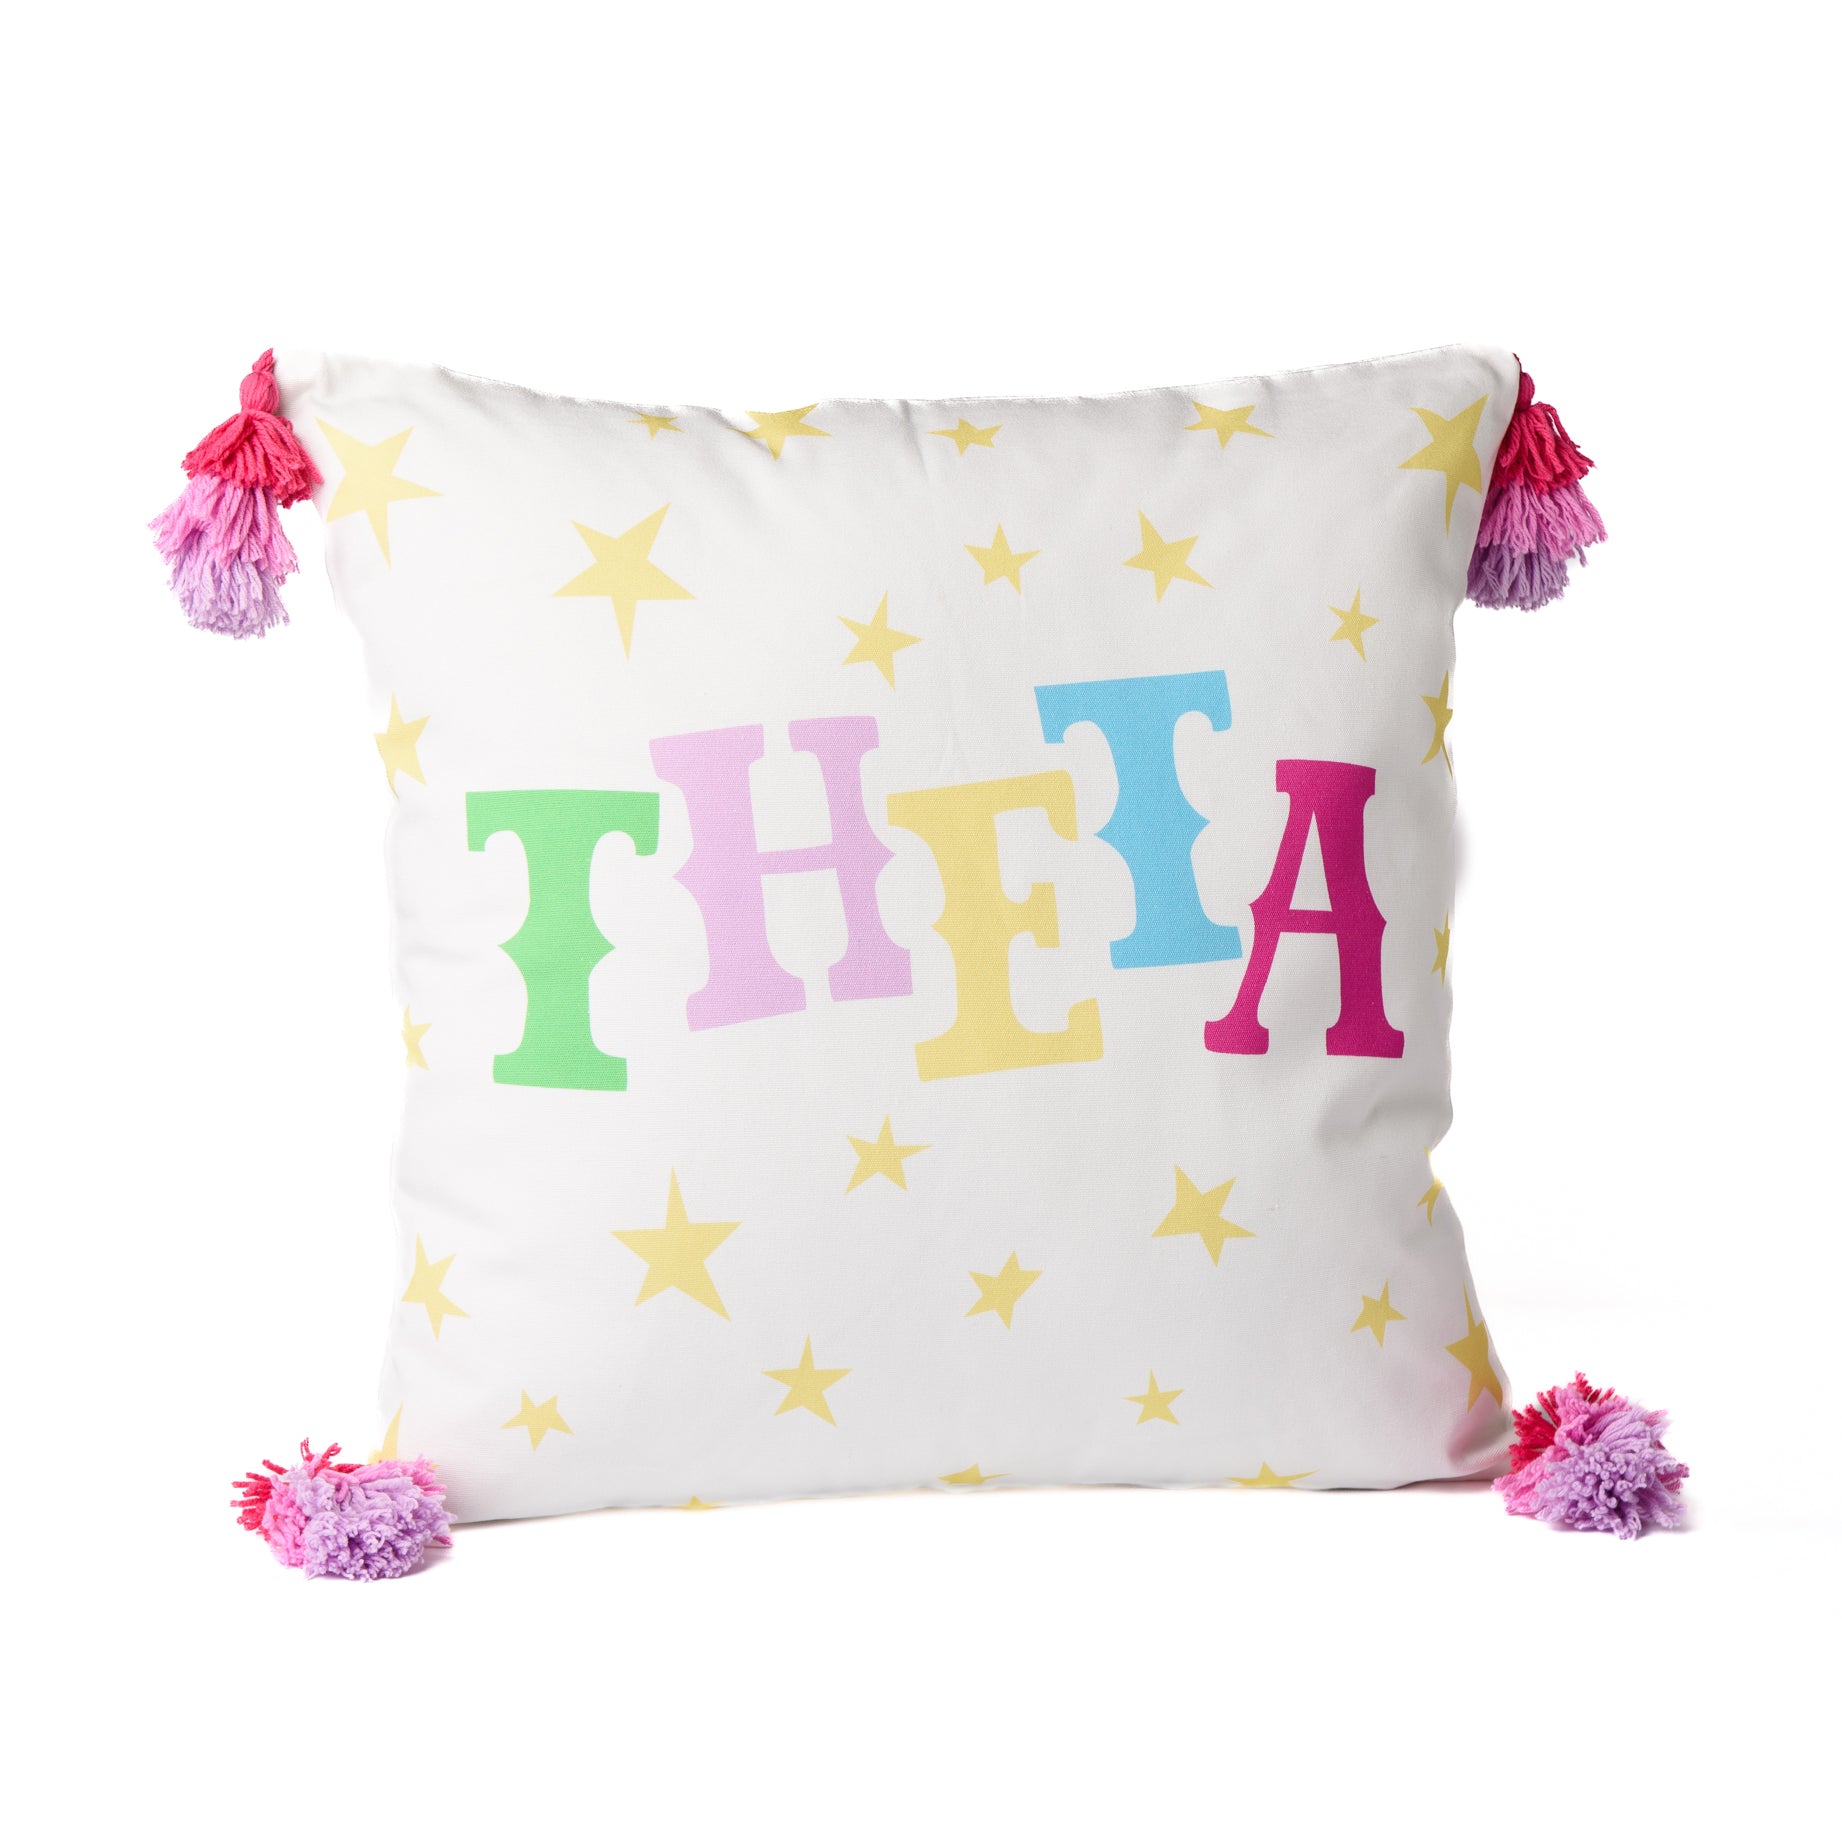 "Oh My Stars" Printed Pillow